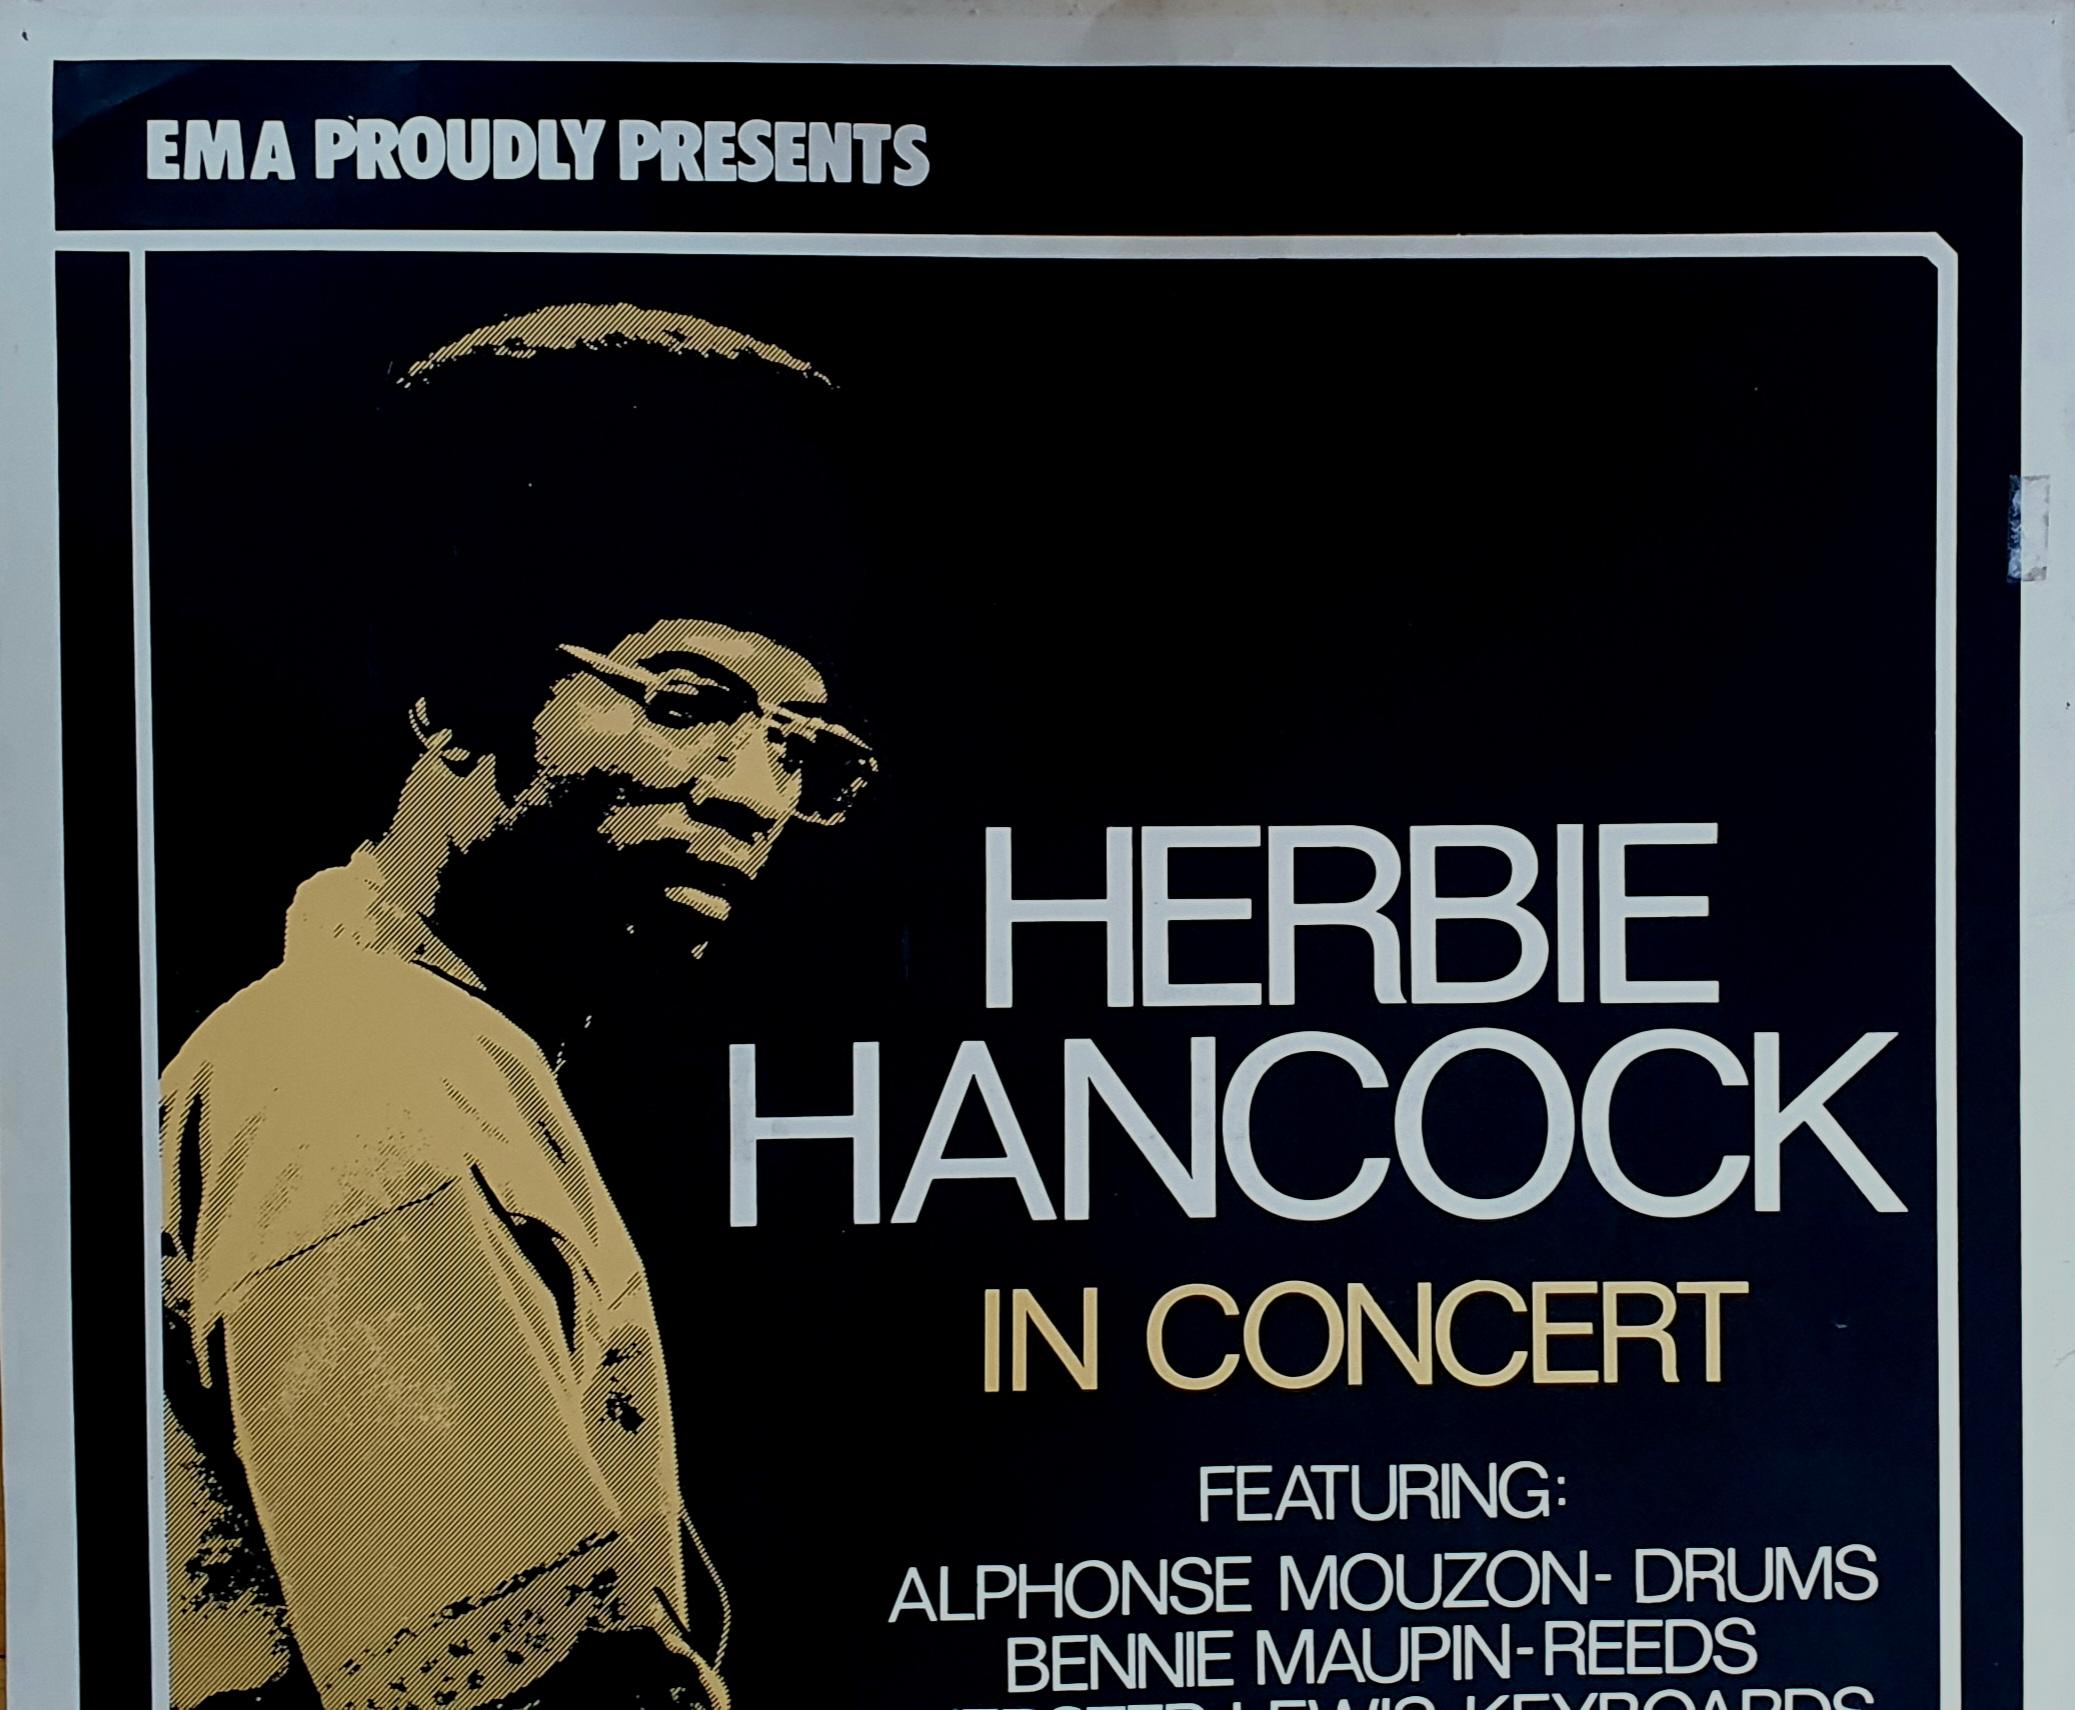 Original vintage advertising poster for a concert by Herbie Hancock in Tiviolis concert hall, Copenhagen Denmark.

In 1979, Tivoli Gardens hosted a memorable concert featuring the legendary jazz pianist Herbie Hancock. The event marked a significant